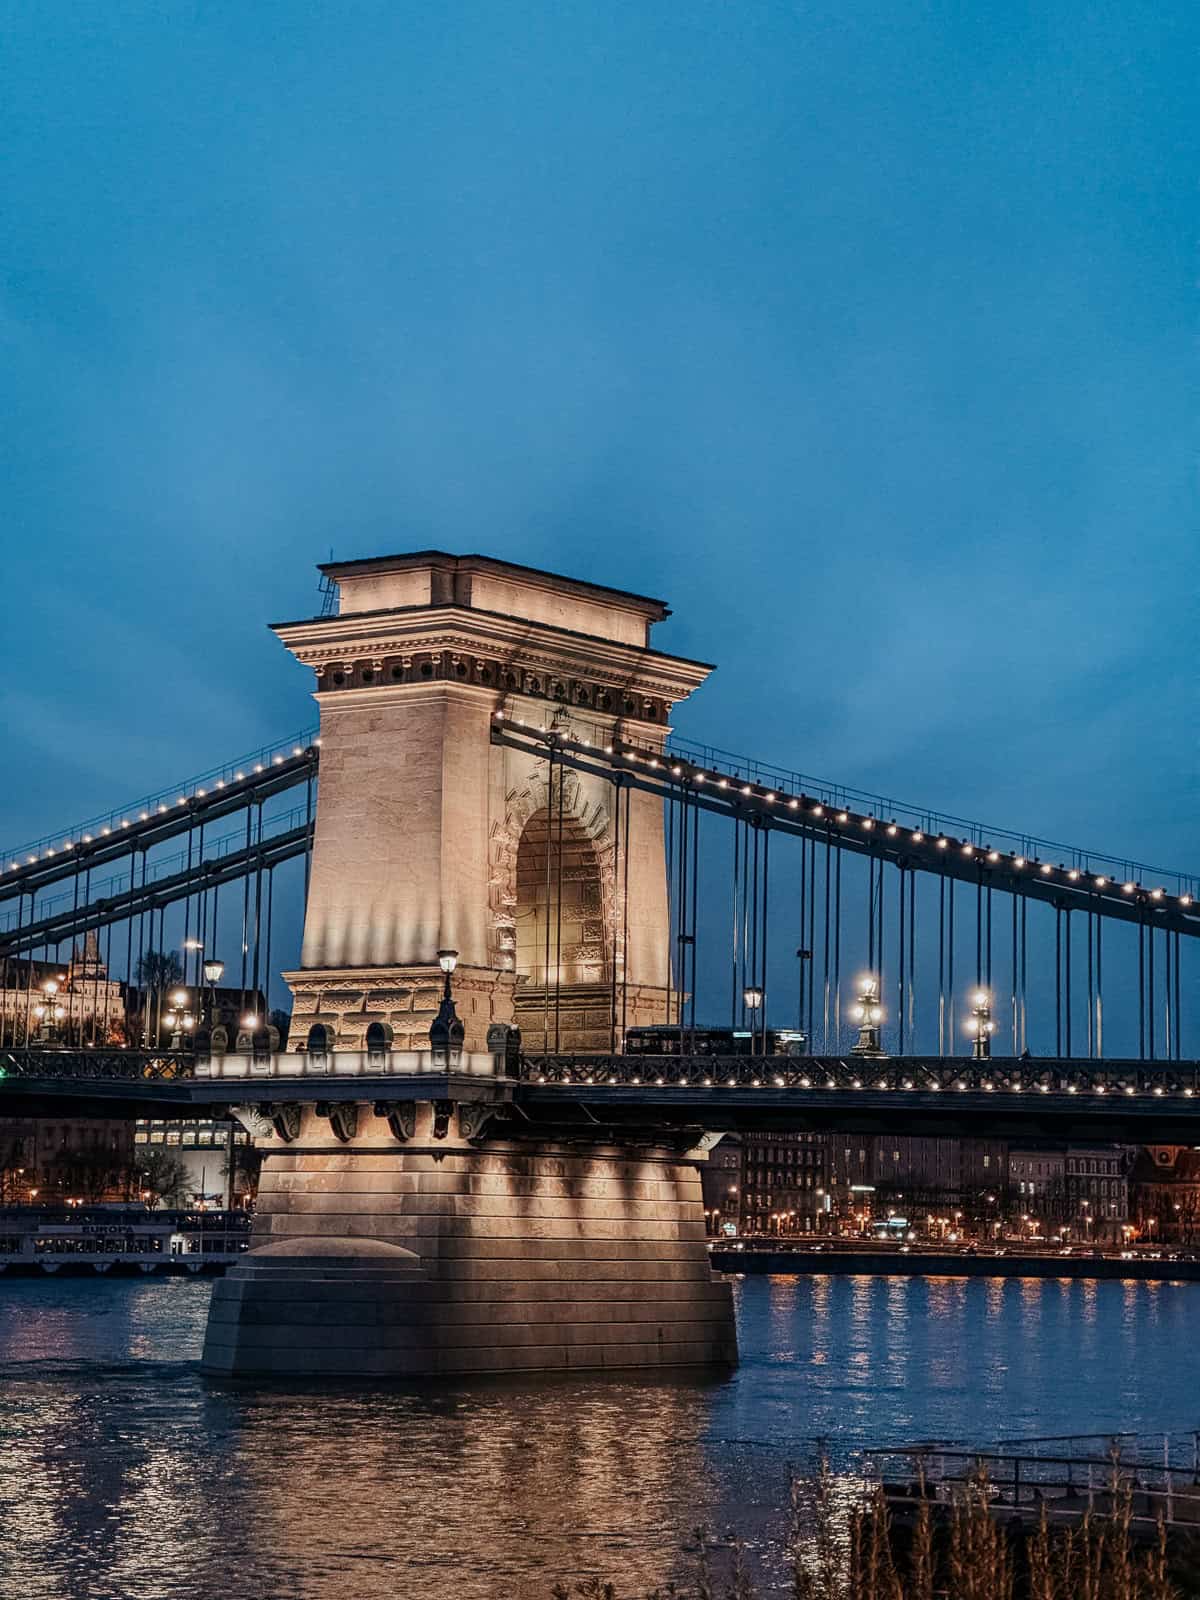 The Széchenyi Chain Bridge illuminated at night, spanning the Danube River in Budapest with city lights reflecting on the wate